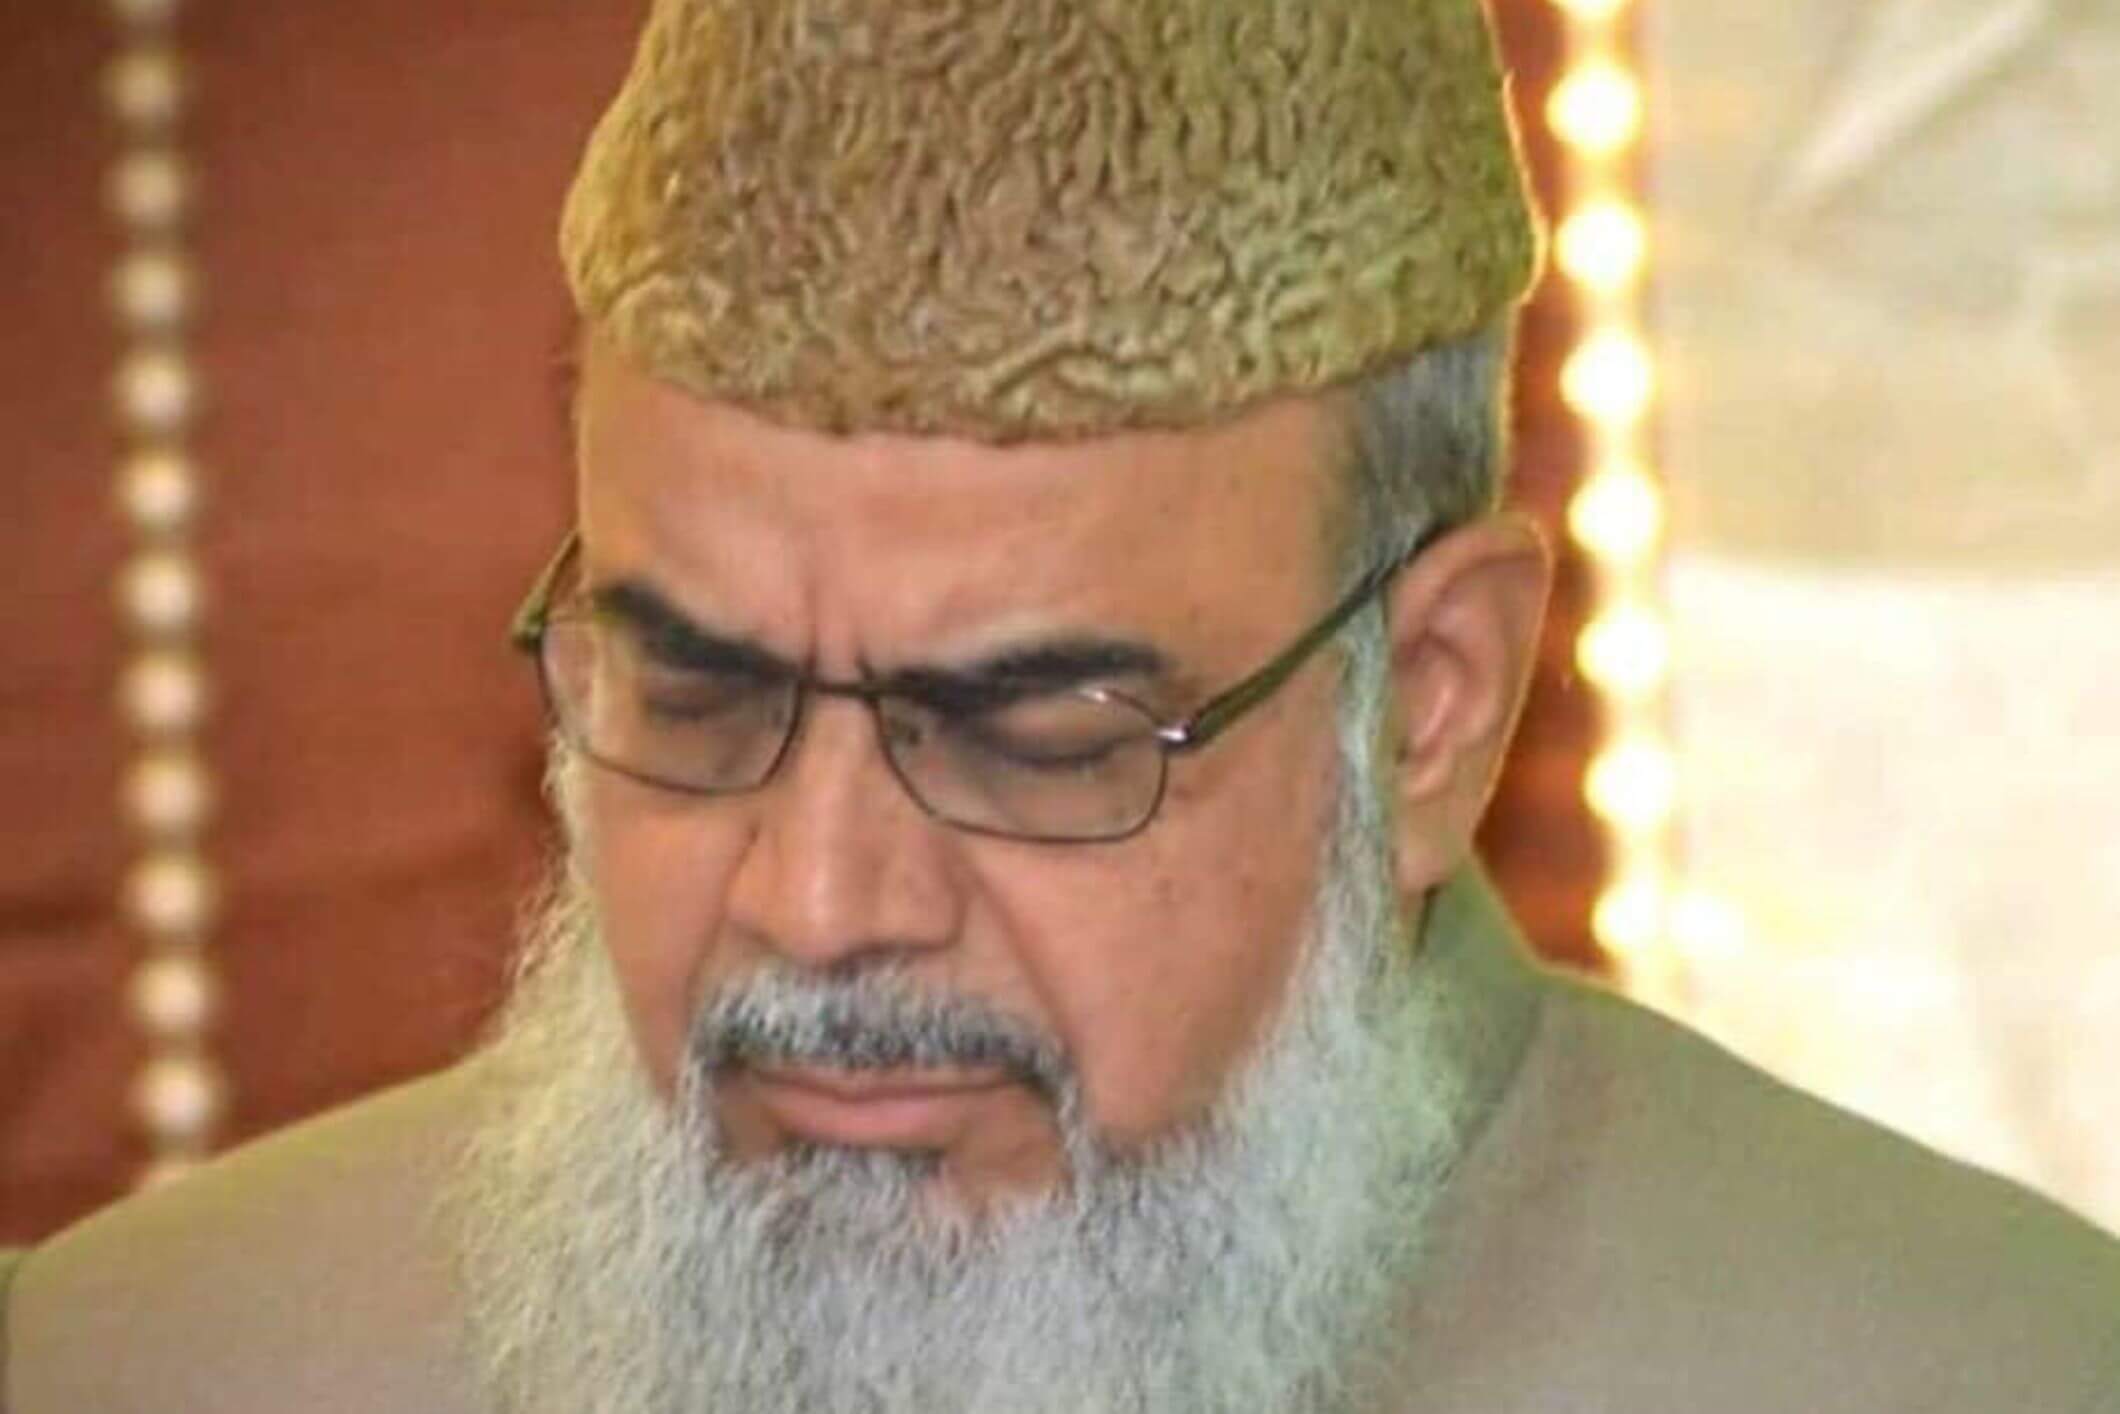 Leicester Imam Shahid Raza who Died Aged 72, A Tributes Paid